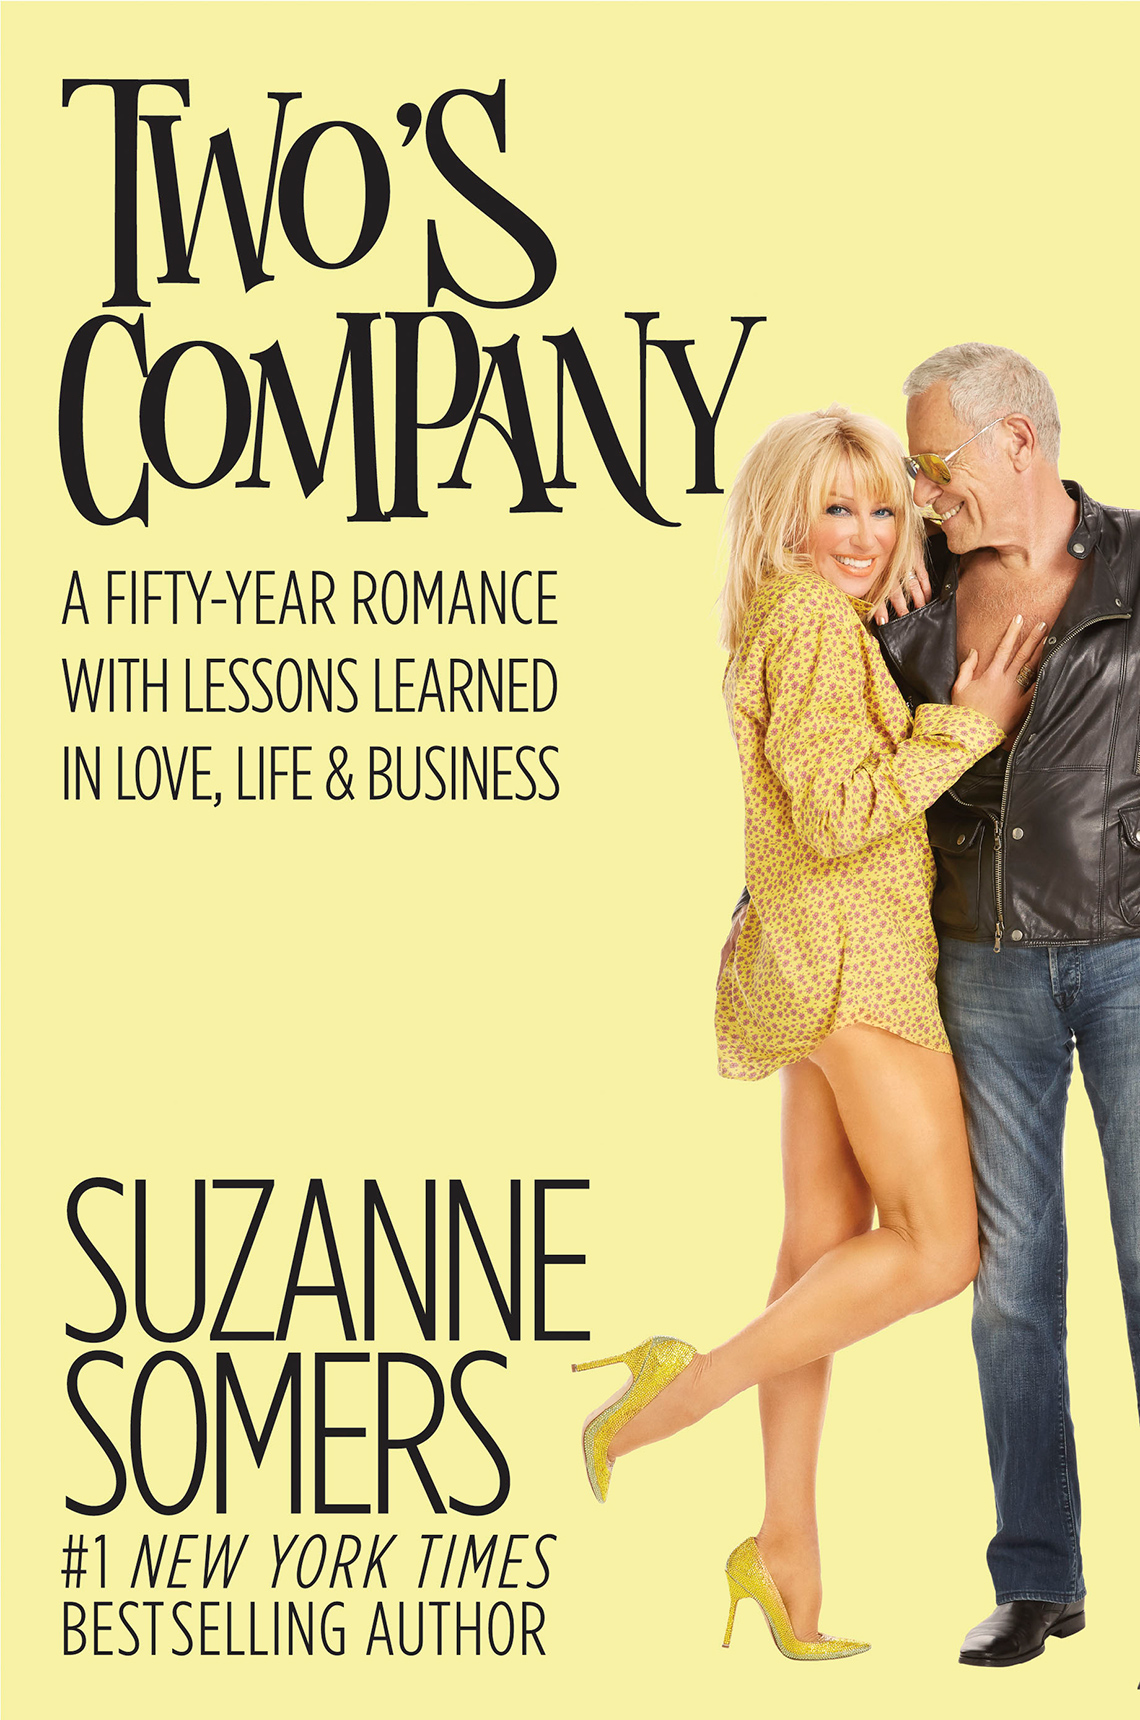 'Two's Company' by Suzanne Somers